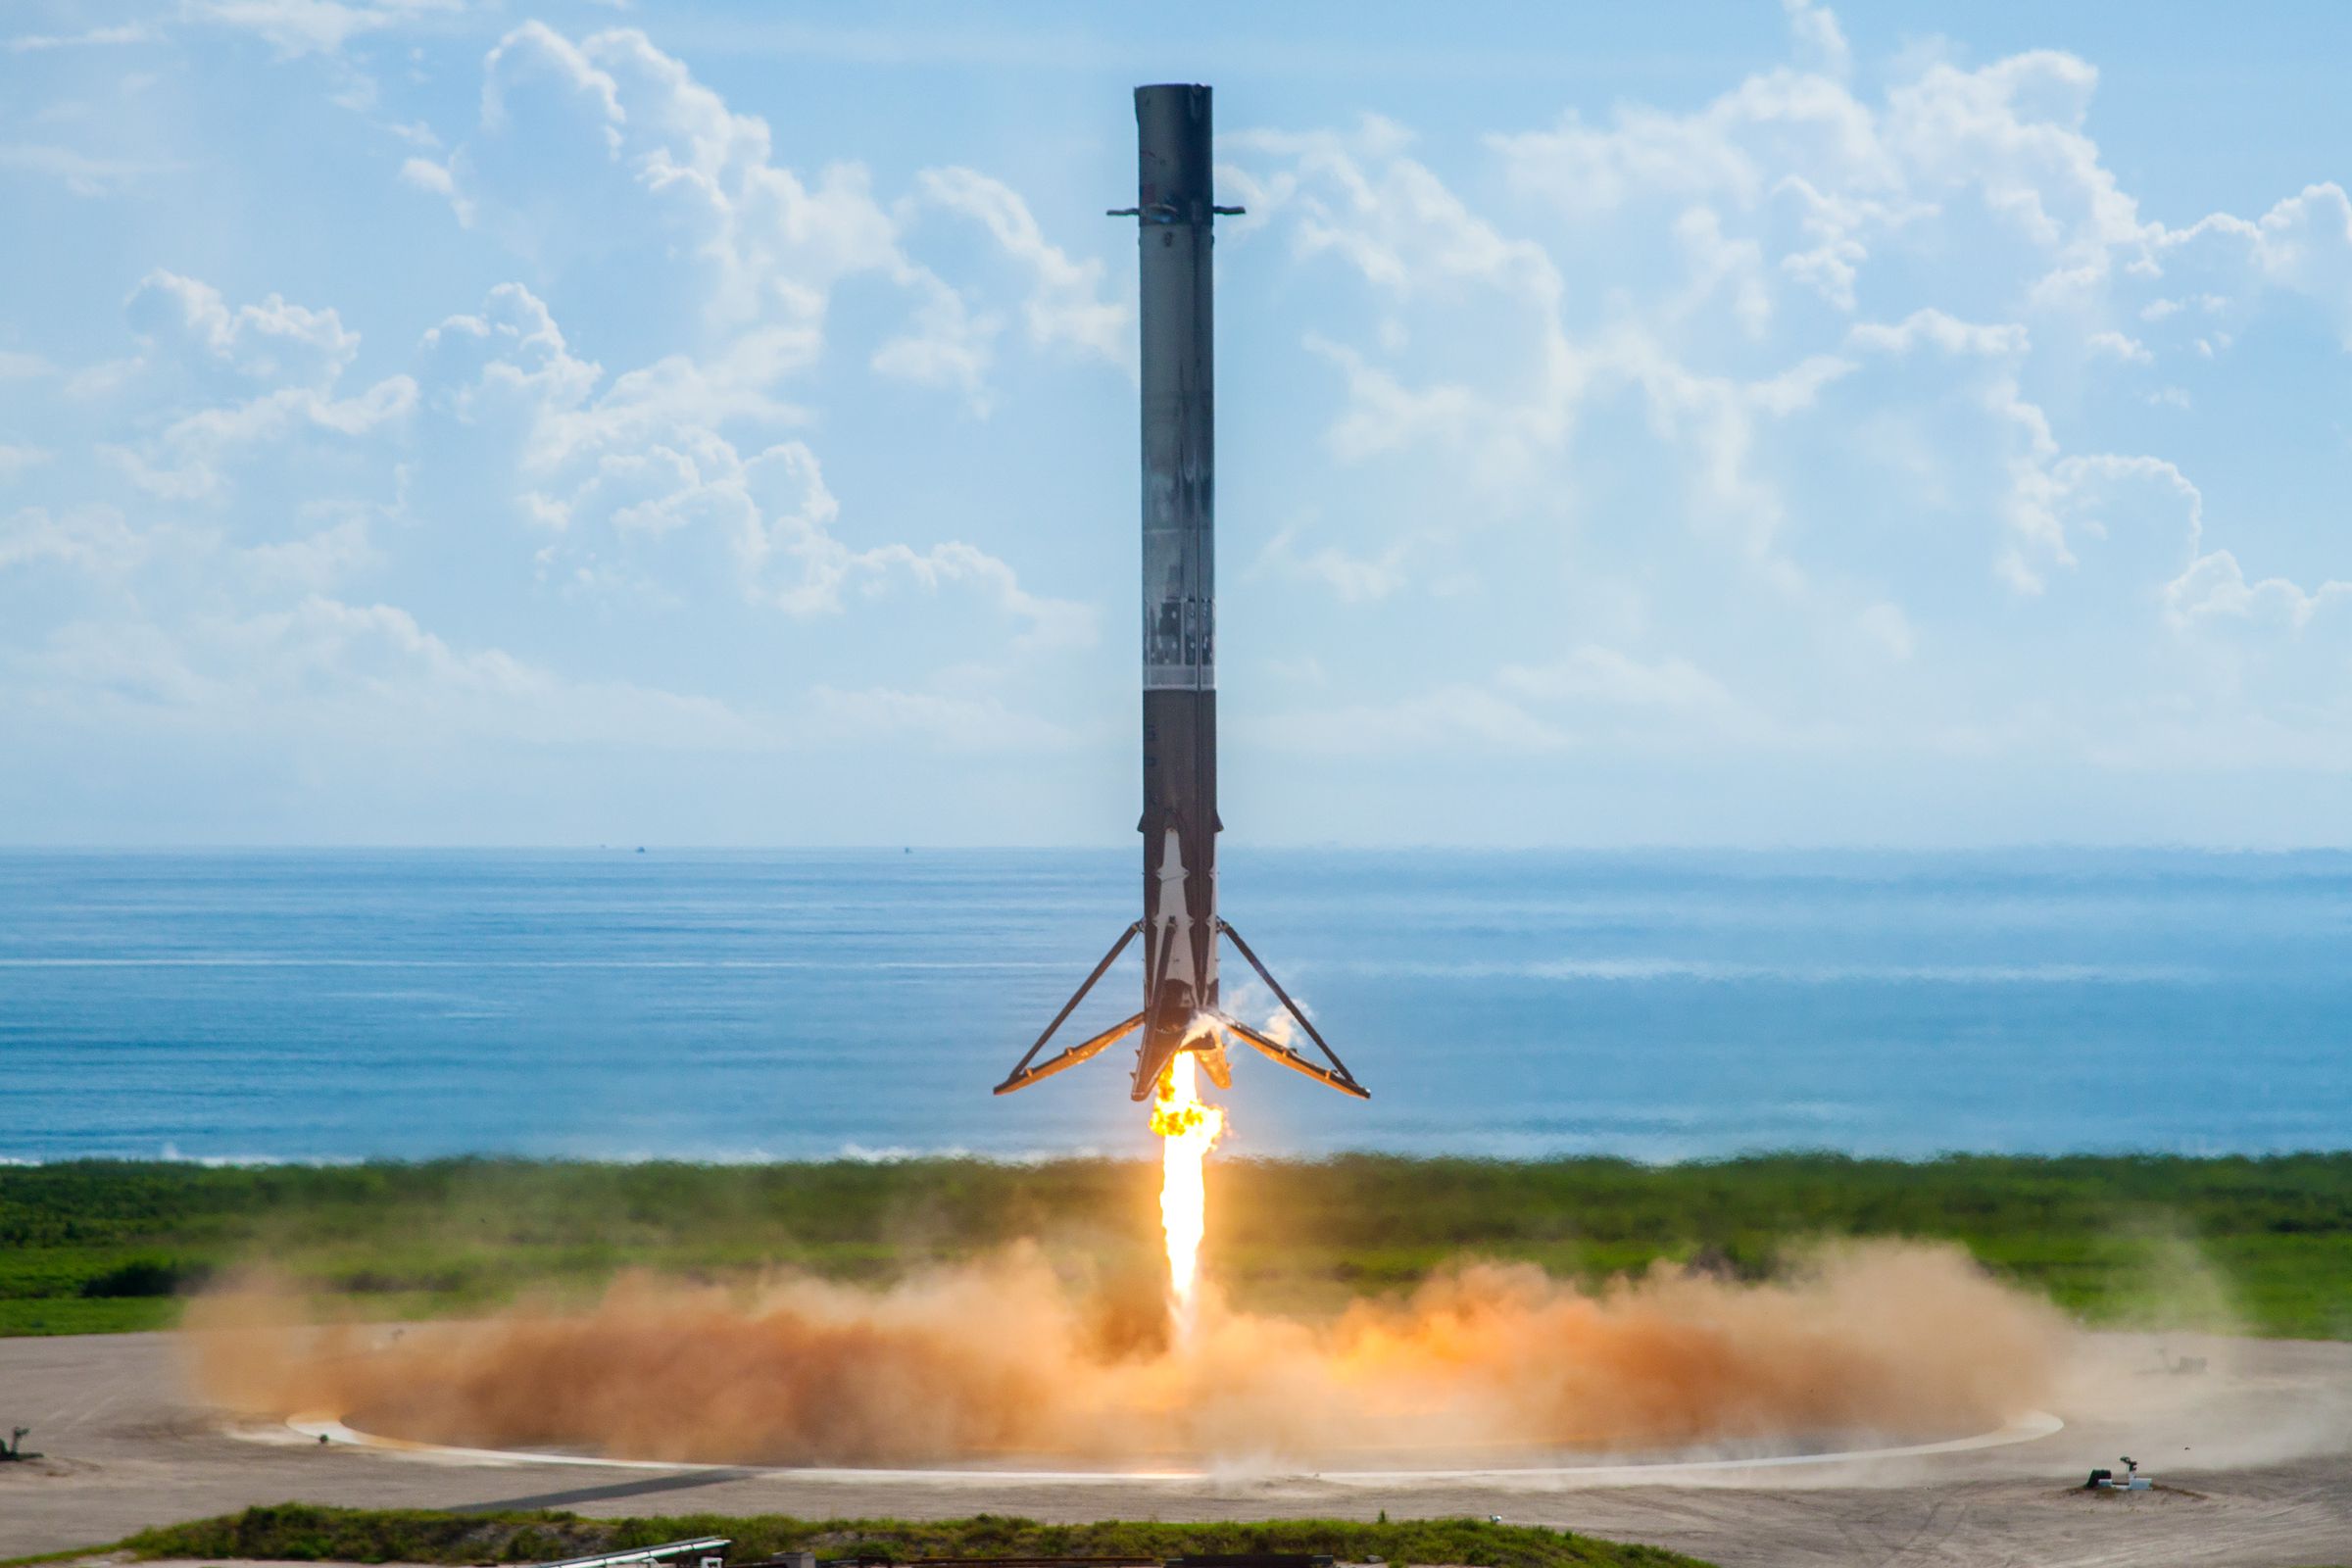 One of SpaceX’s Falcon 9 rockets landing at Cape Canaveral, Florida.